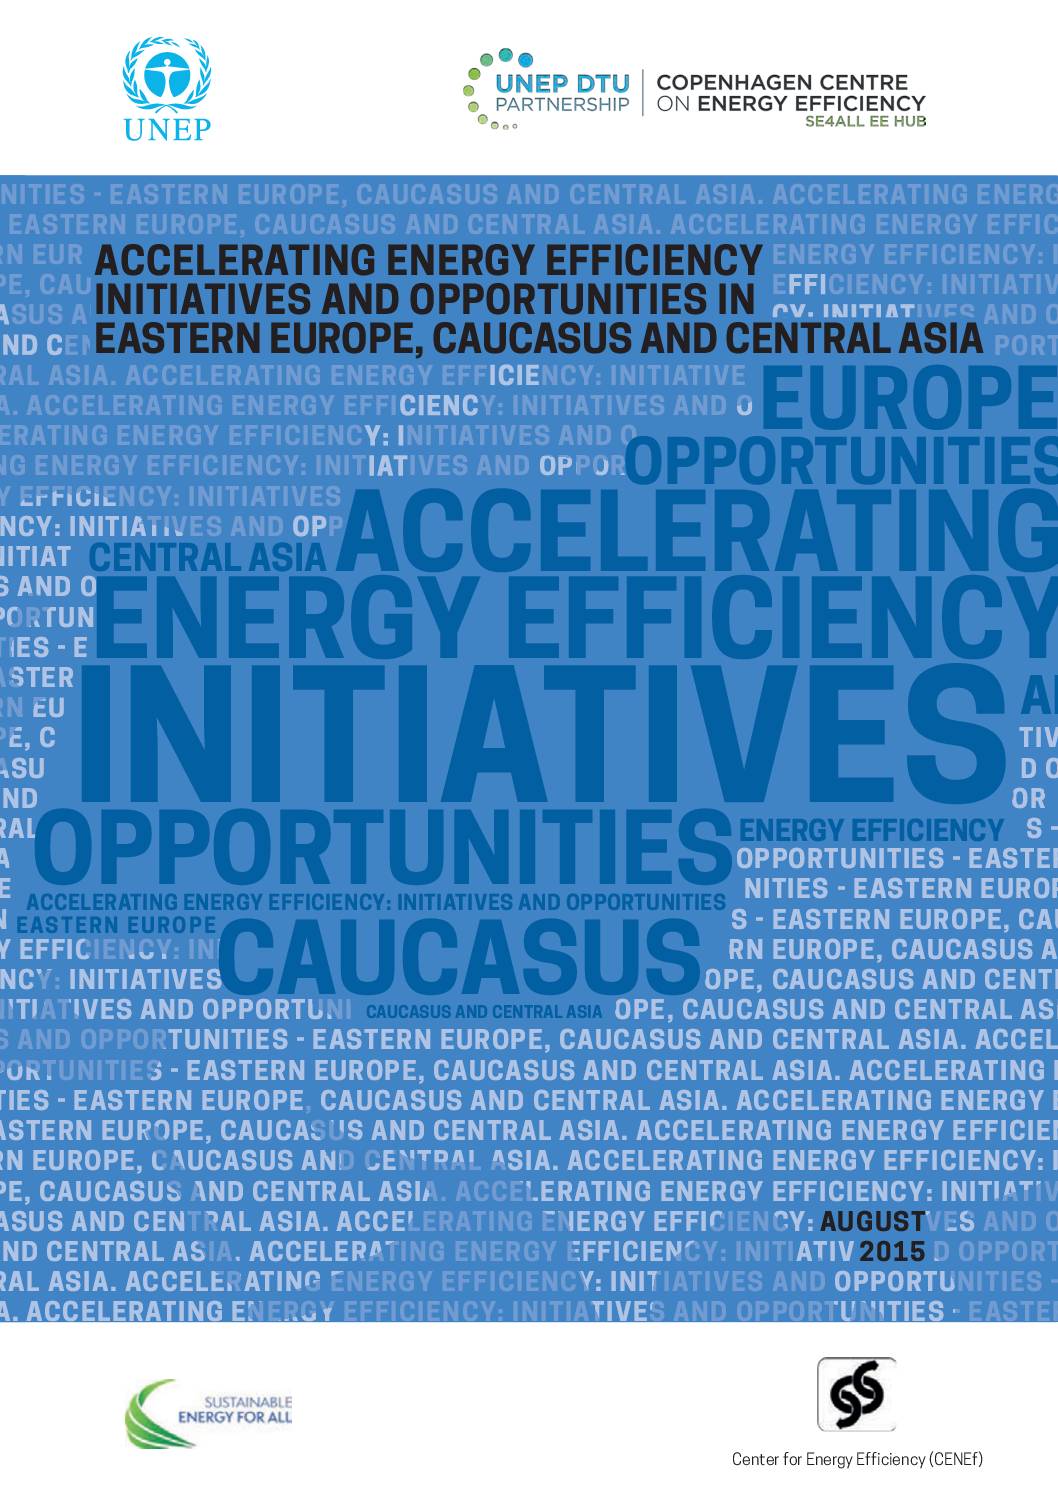 Accelerating Energy Efficiency: Initiatives and Opportunities – Eastern Europe, the Caucasus and Central Asia (English version)